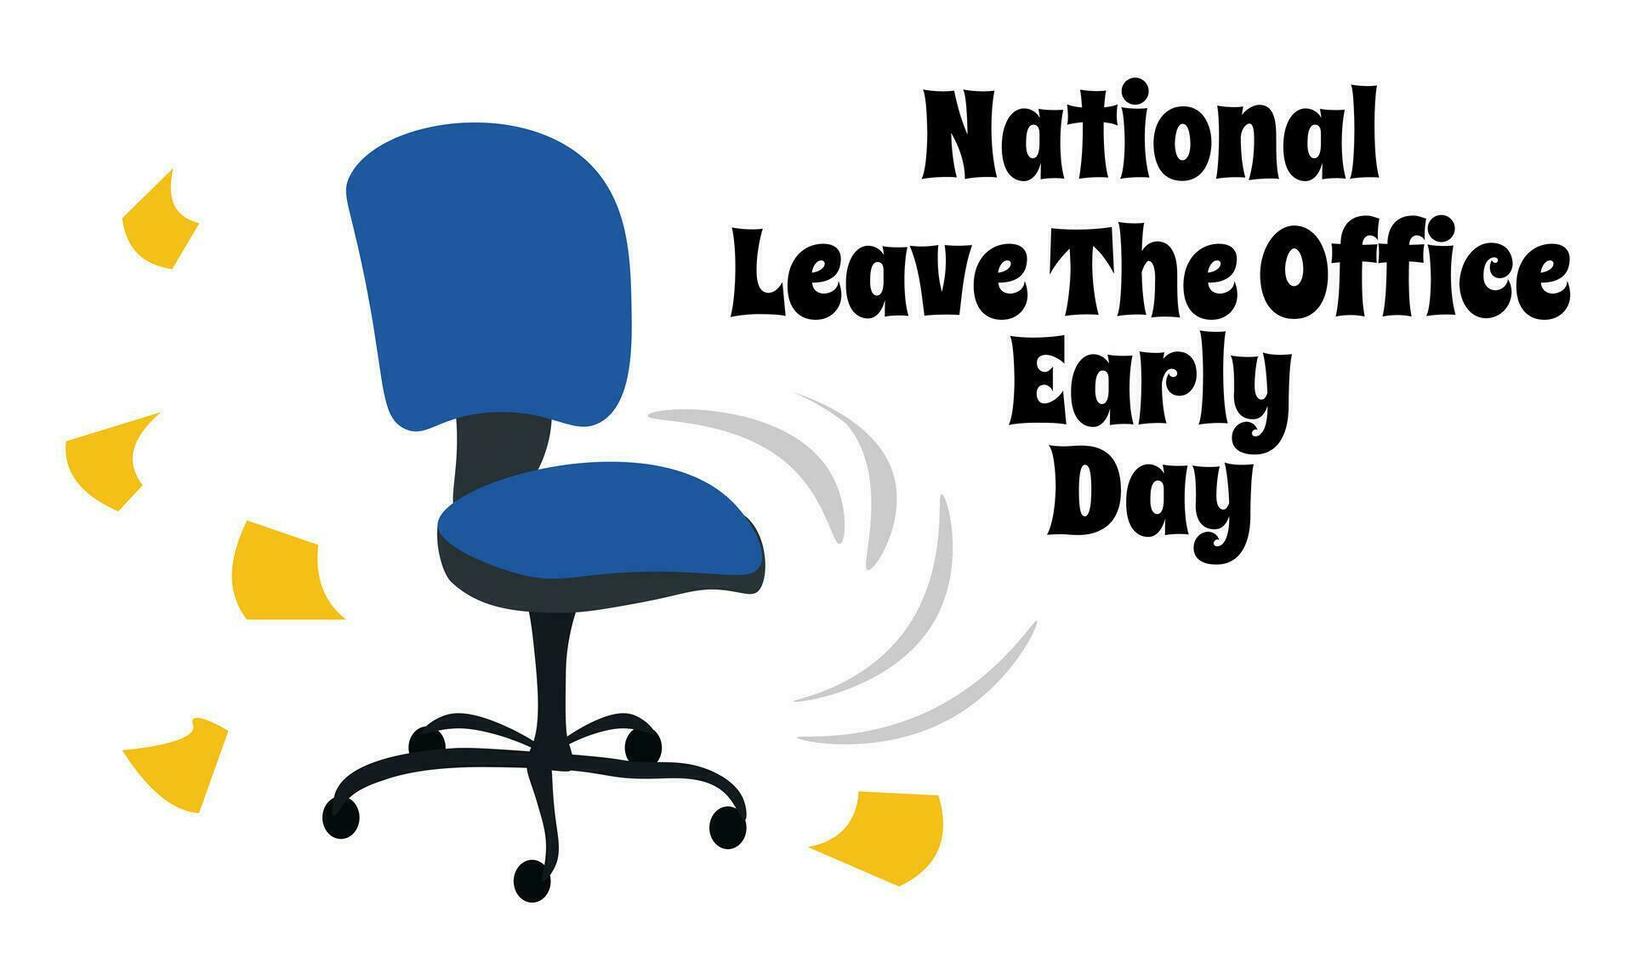 National Leave The Office Early Day, idea for poster, banner, flyer or postcard vector